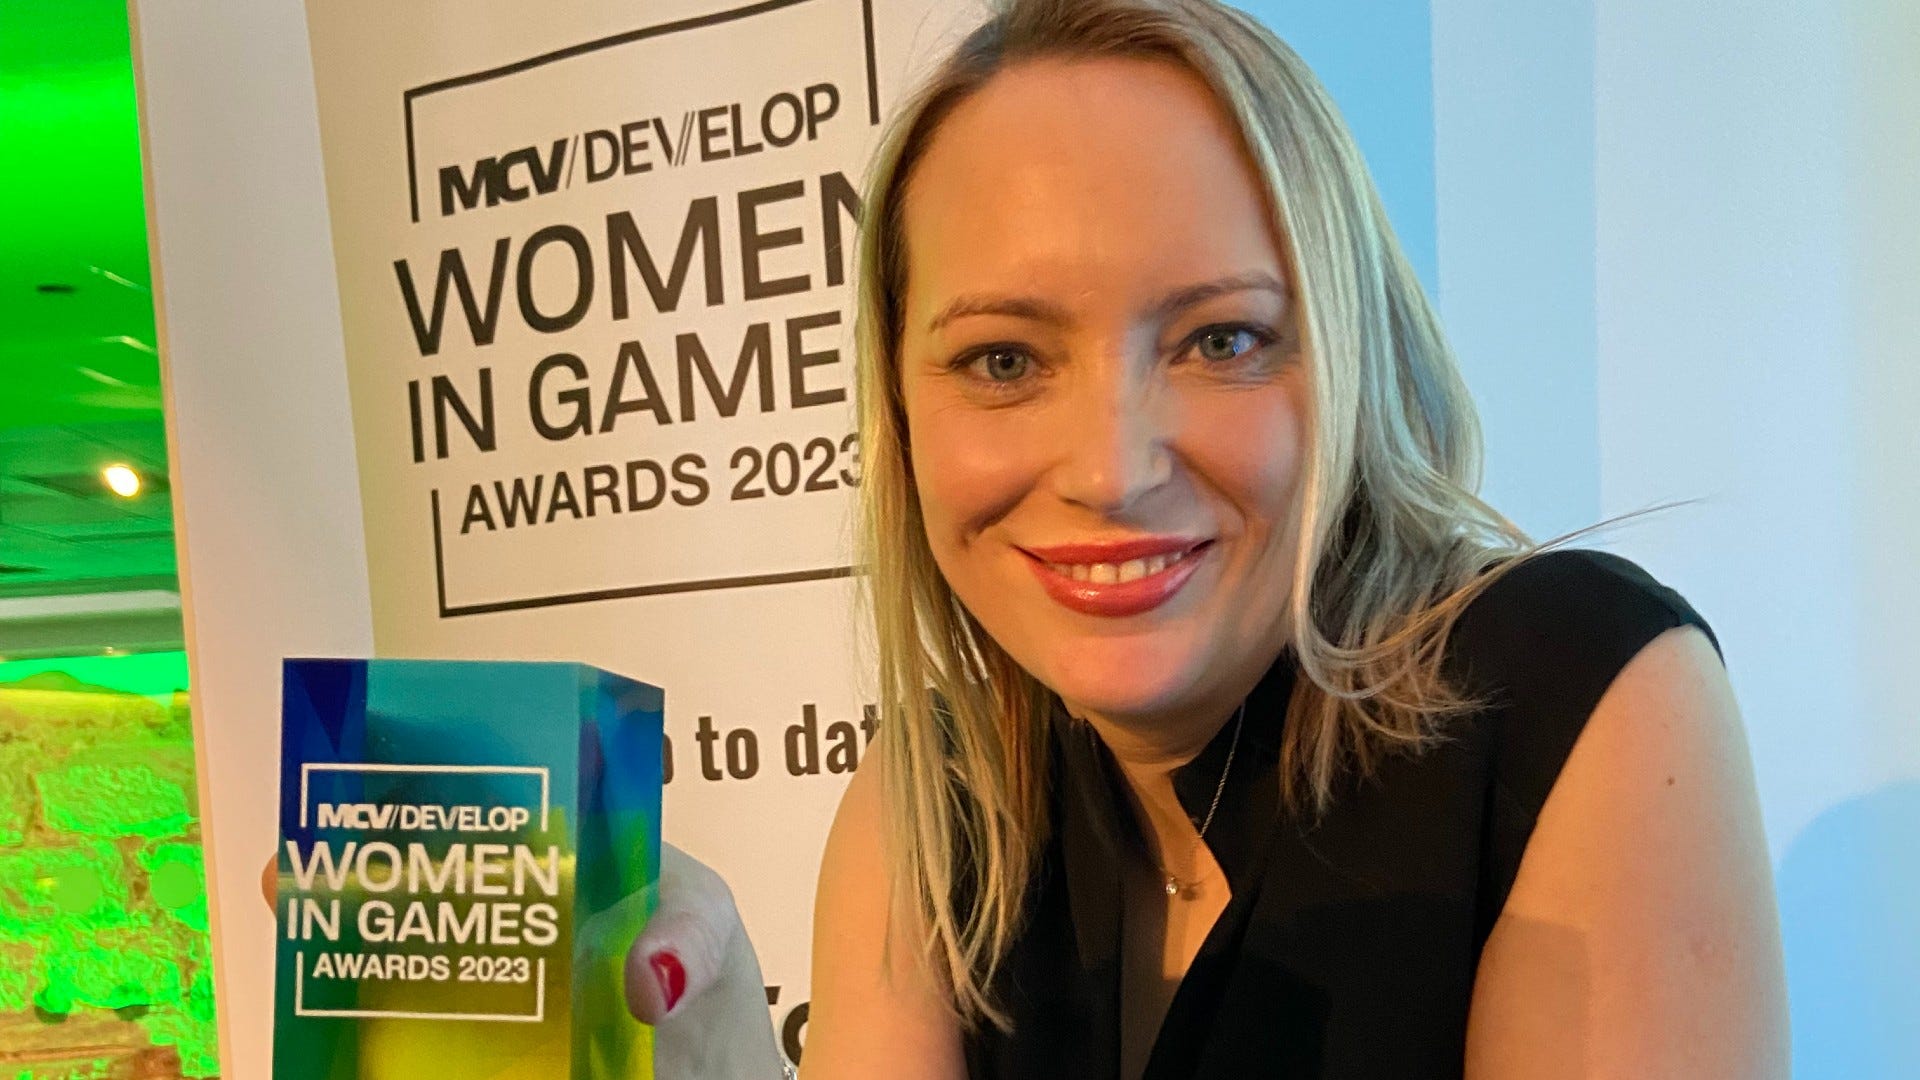 Women in Games Awards 2019: In pictures - MCV/DEVELOP